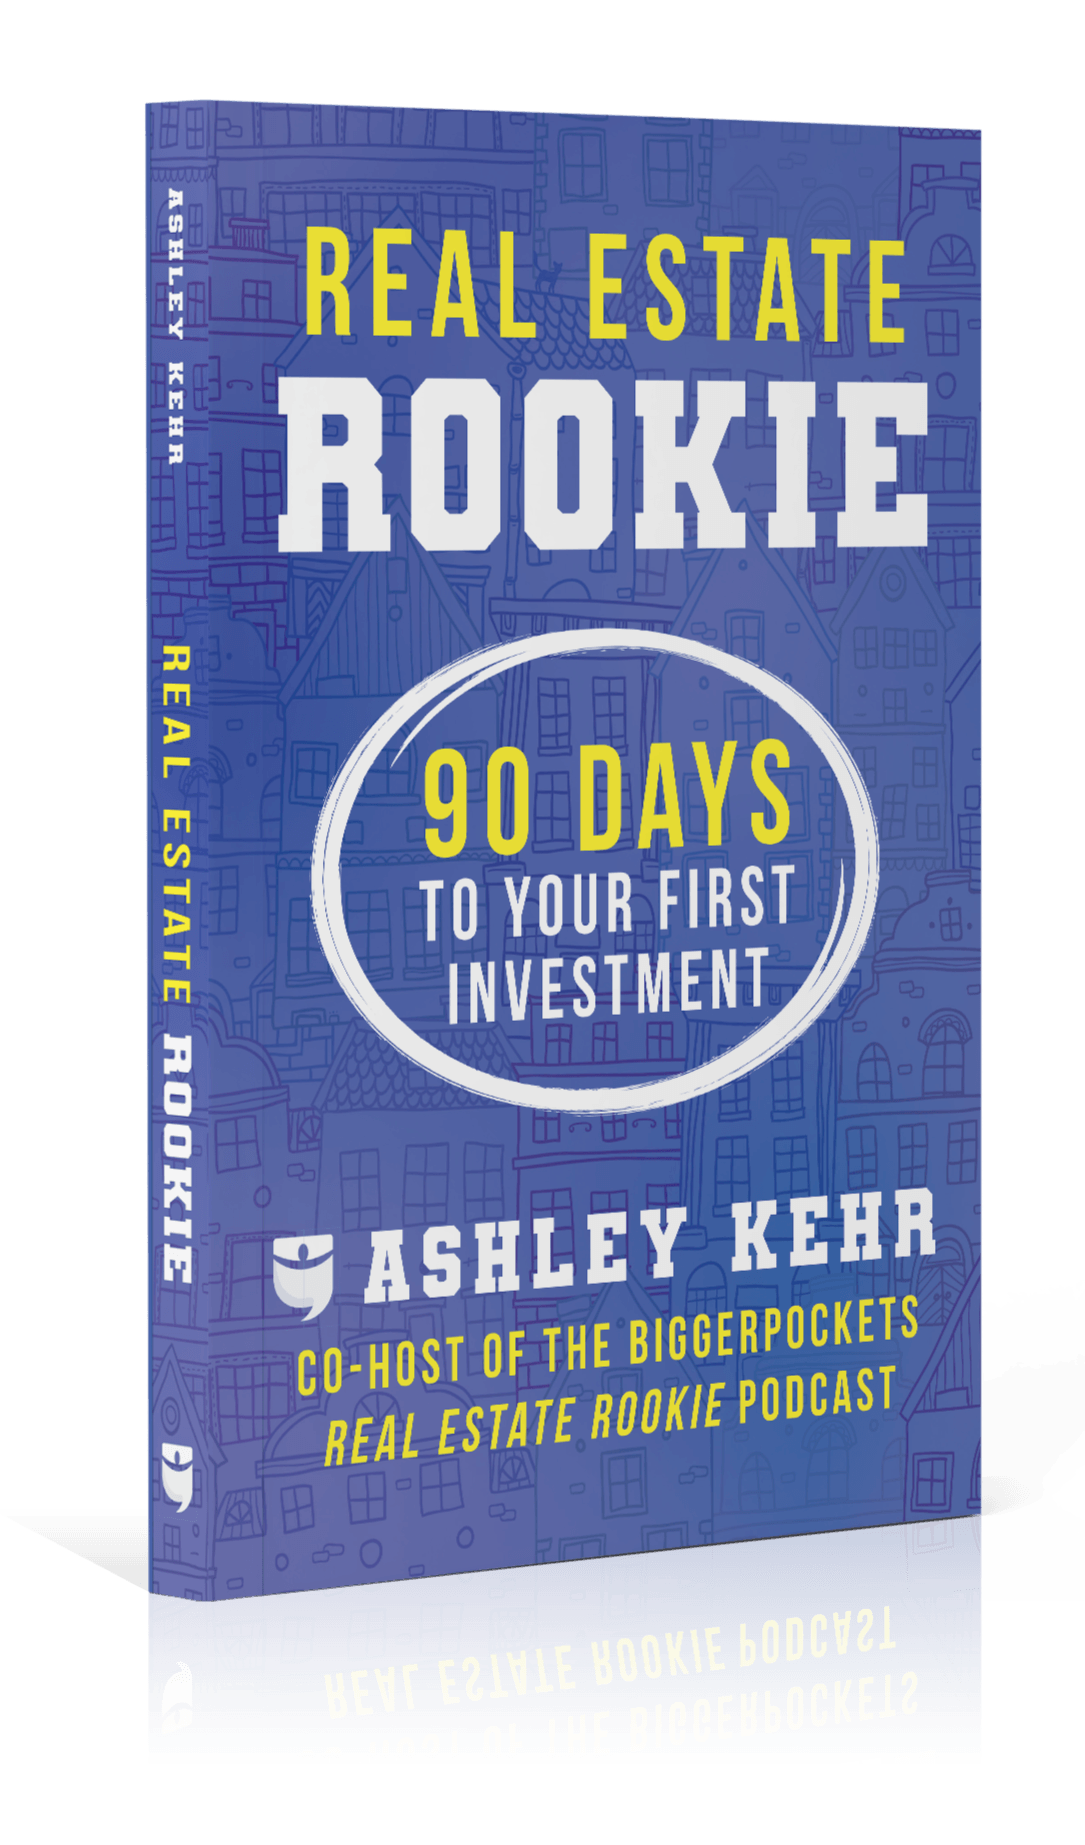 Real Estate Rookie - BiggerPockets Bookstore